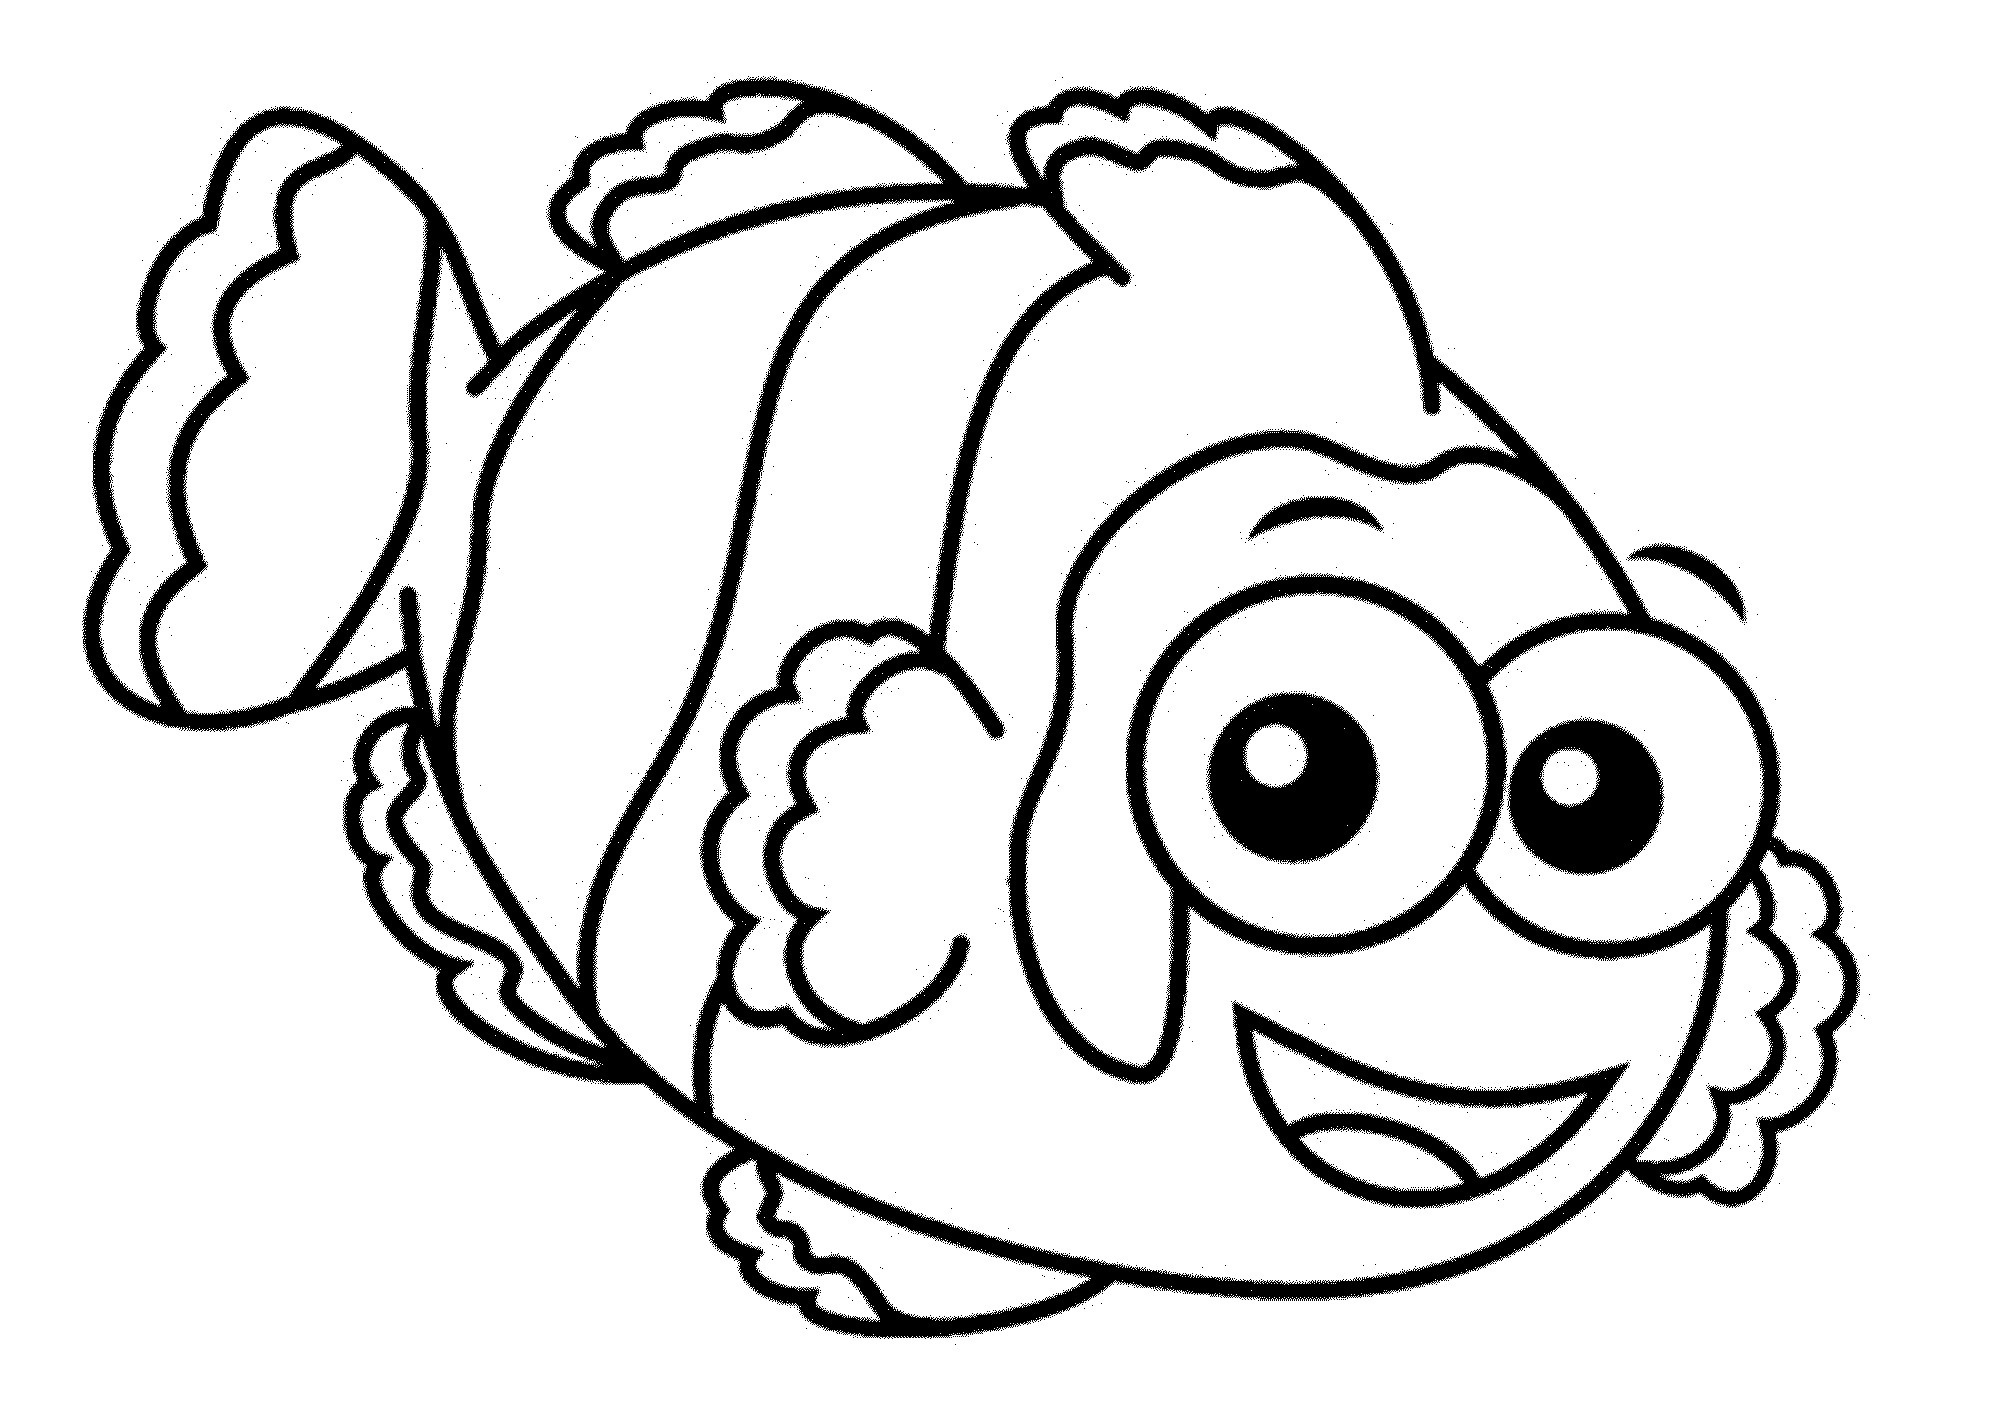 Printable Fish Coloring Pages
 Print & Download Cute and Educative Fish Coloring Pages